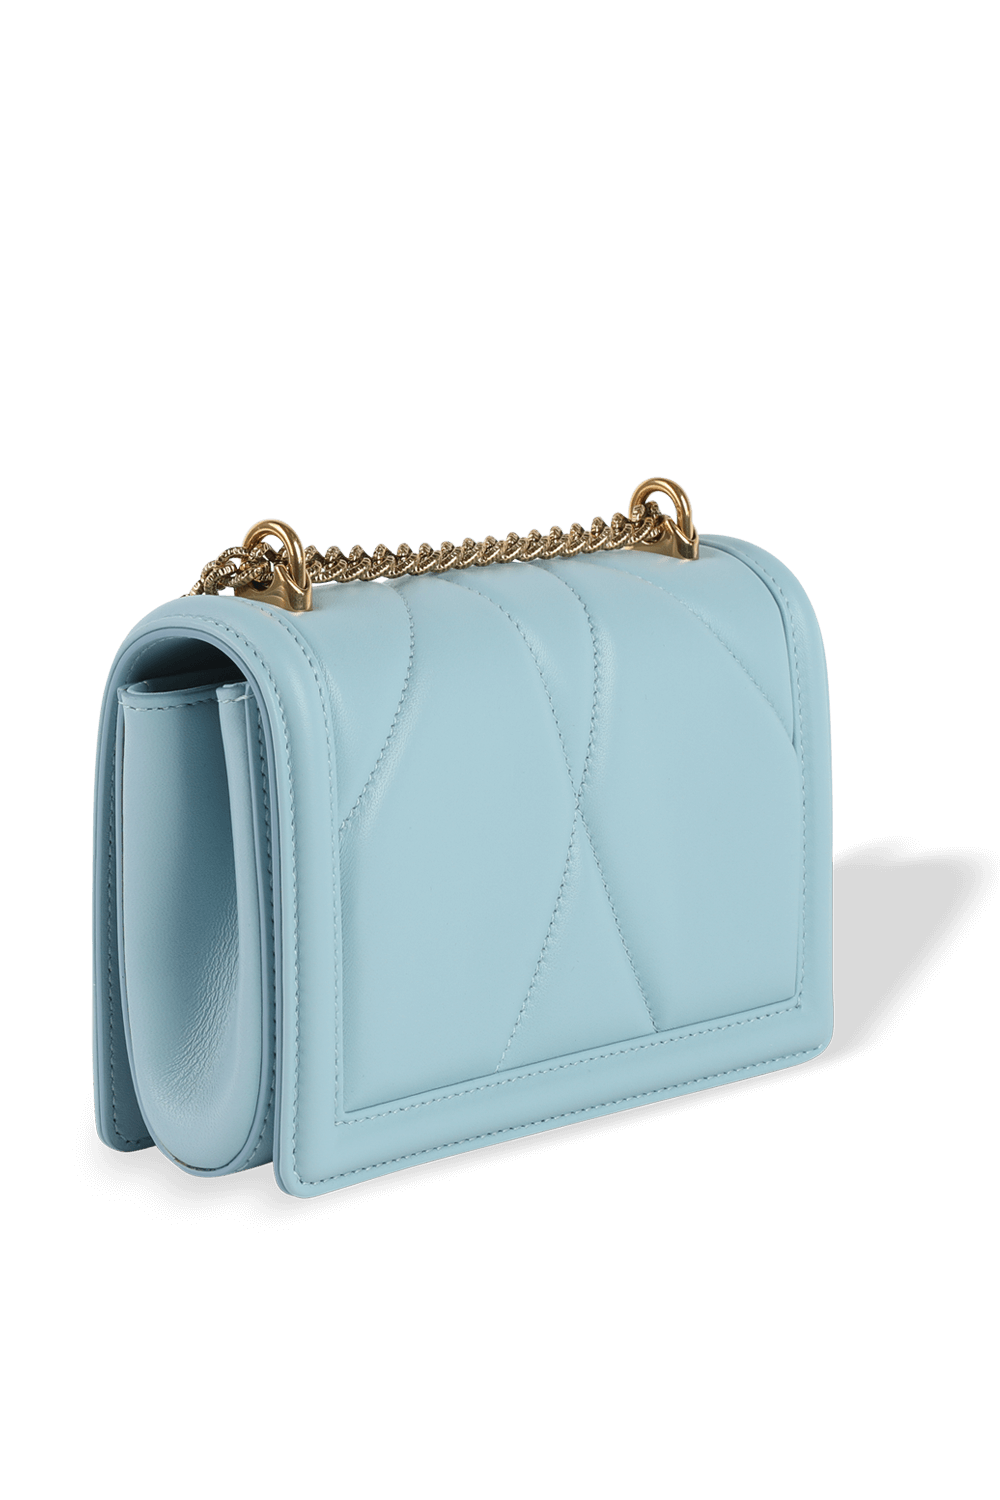 Small Devotion Crossbody Bag in Azure Quilted Nappa Leather DOLCE & GABBANA